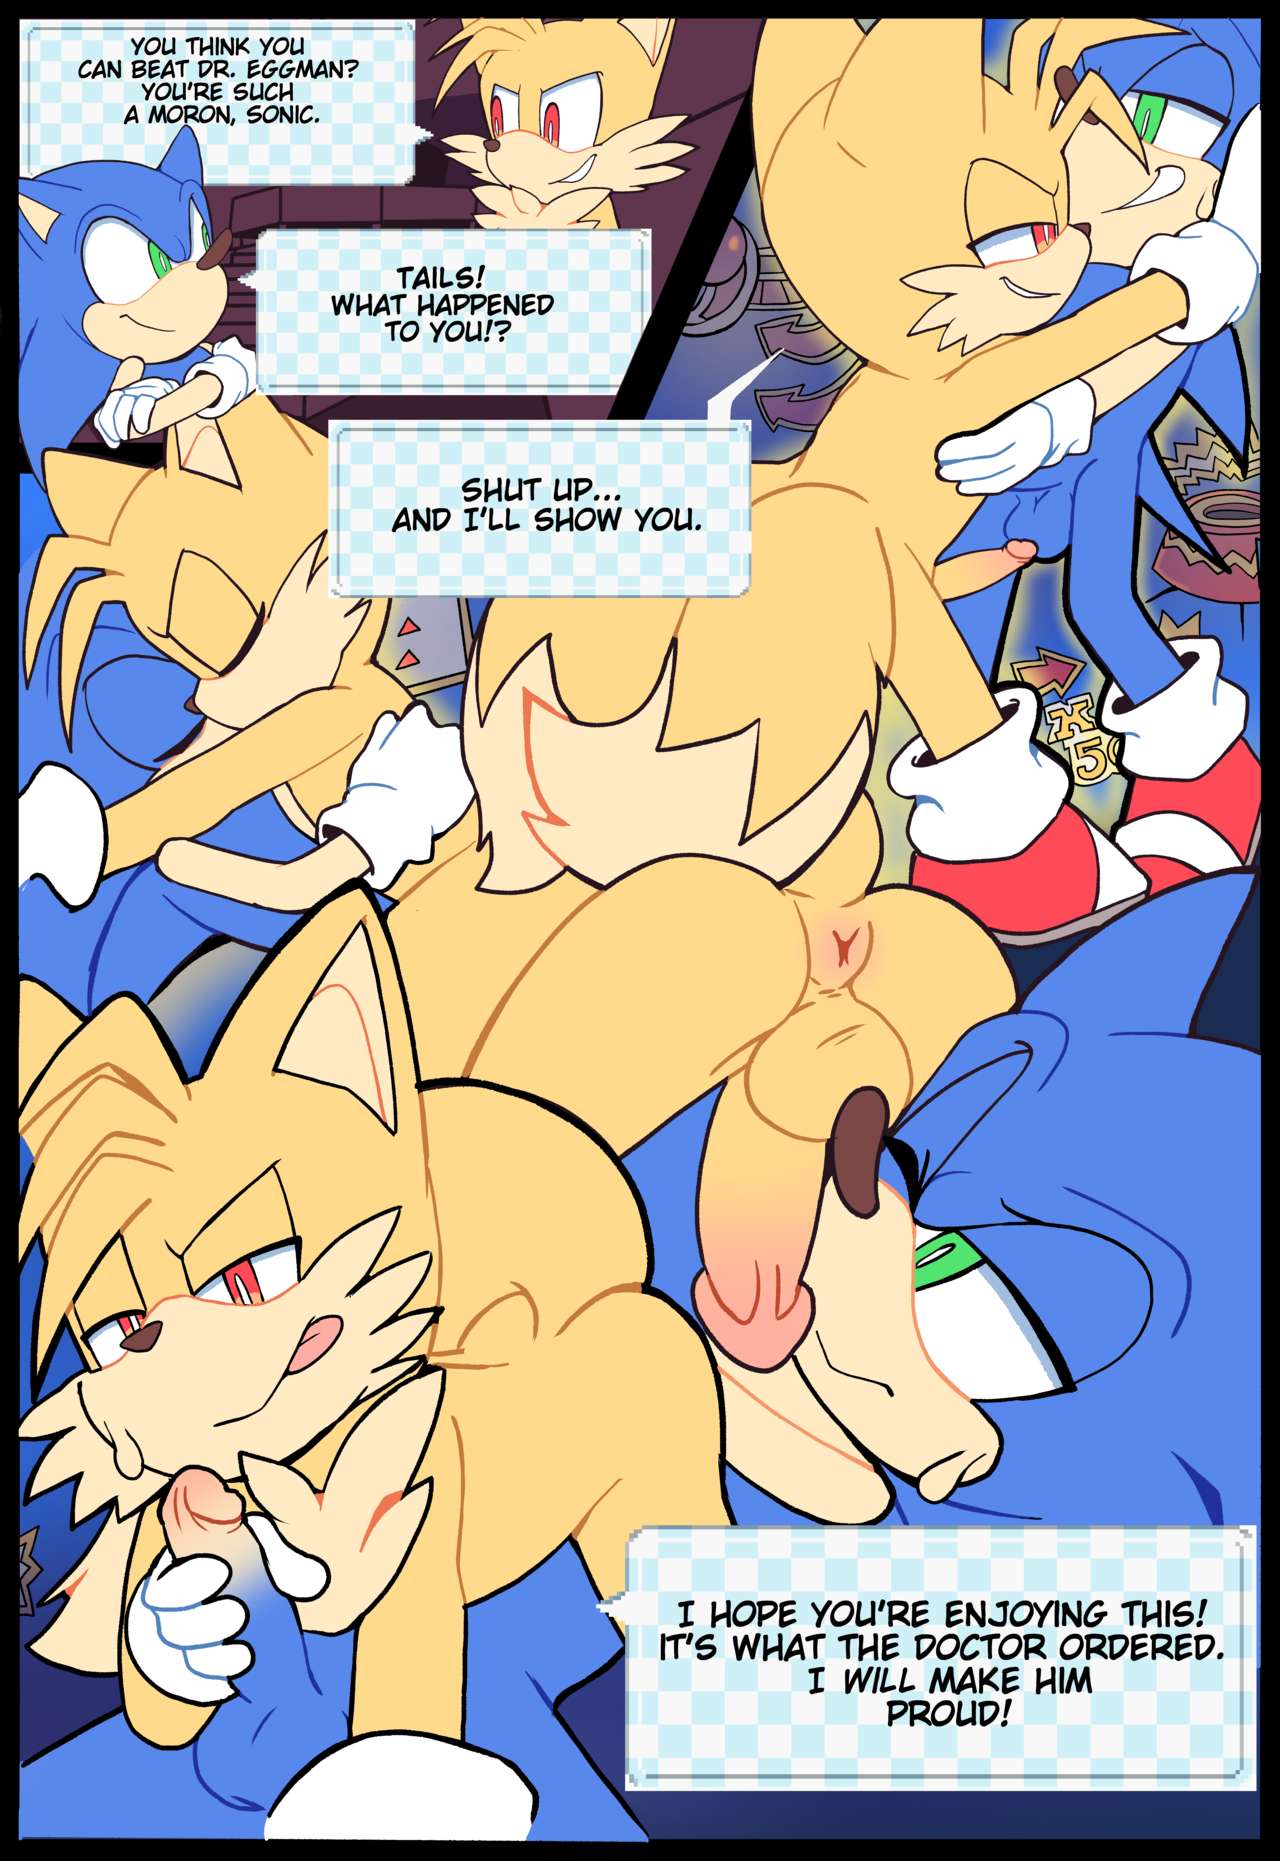 Sonic 3 Porn - Sonic Pinball'd - Page 3 - HentaiEra